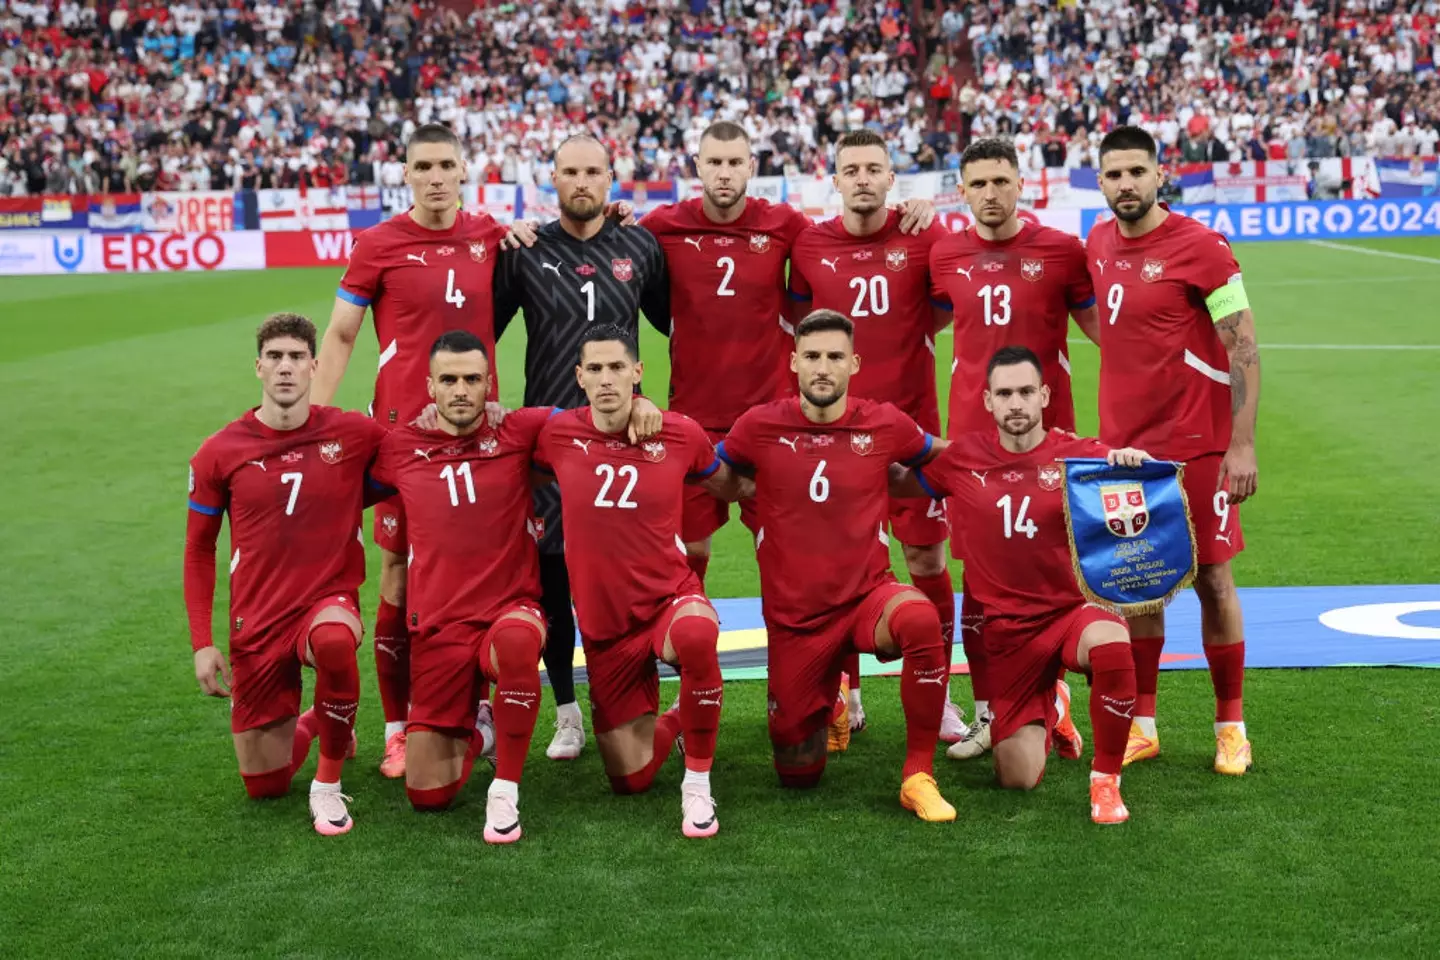 The Serbian FA had reportedly threatened to quit the Euros. (Kevin C. Cox/Getty Images)